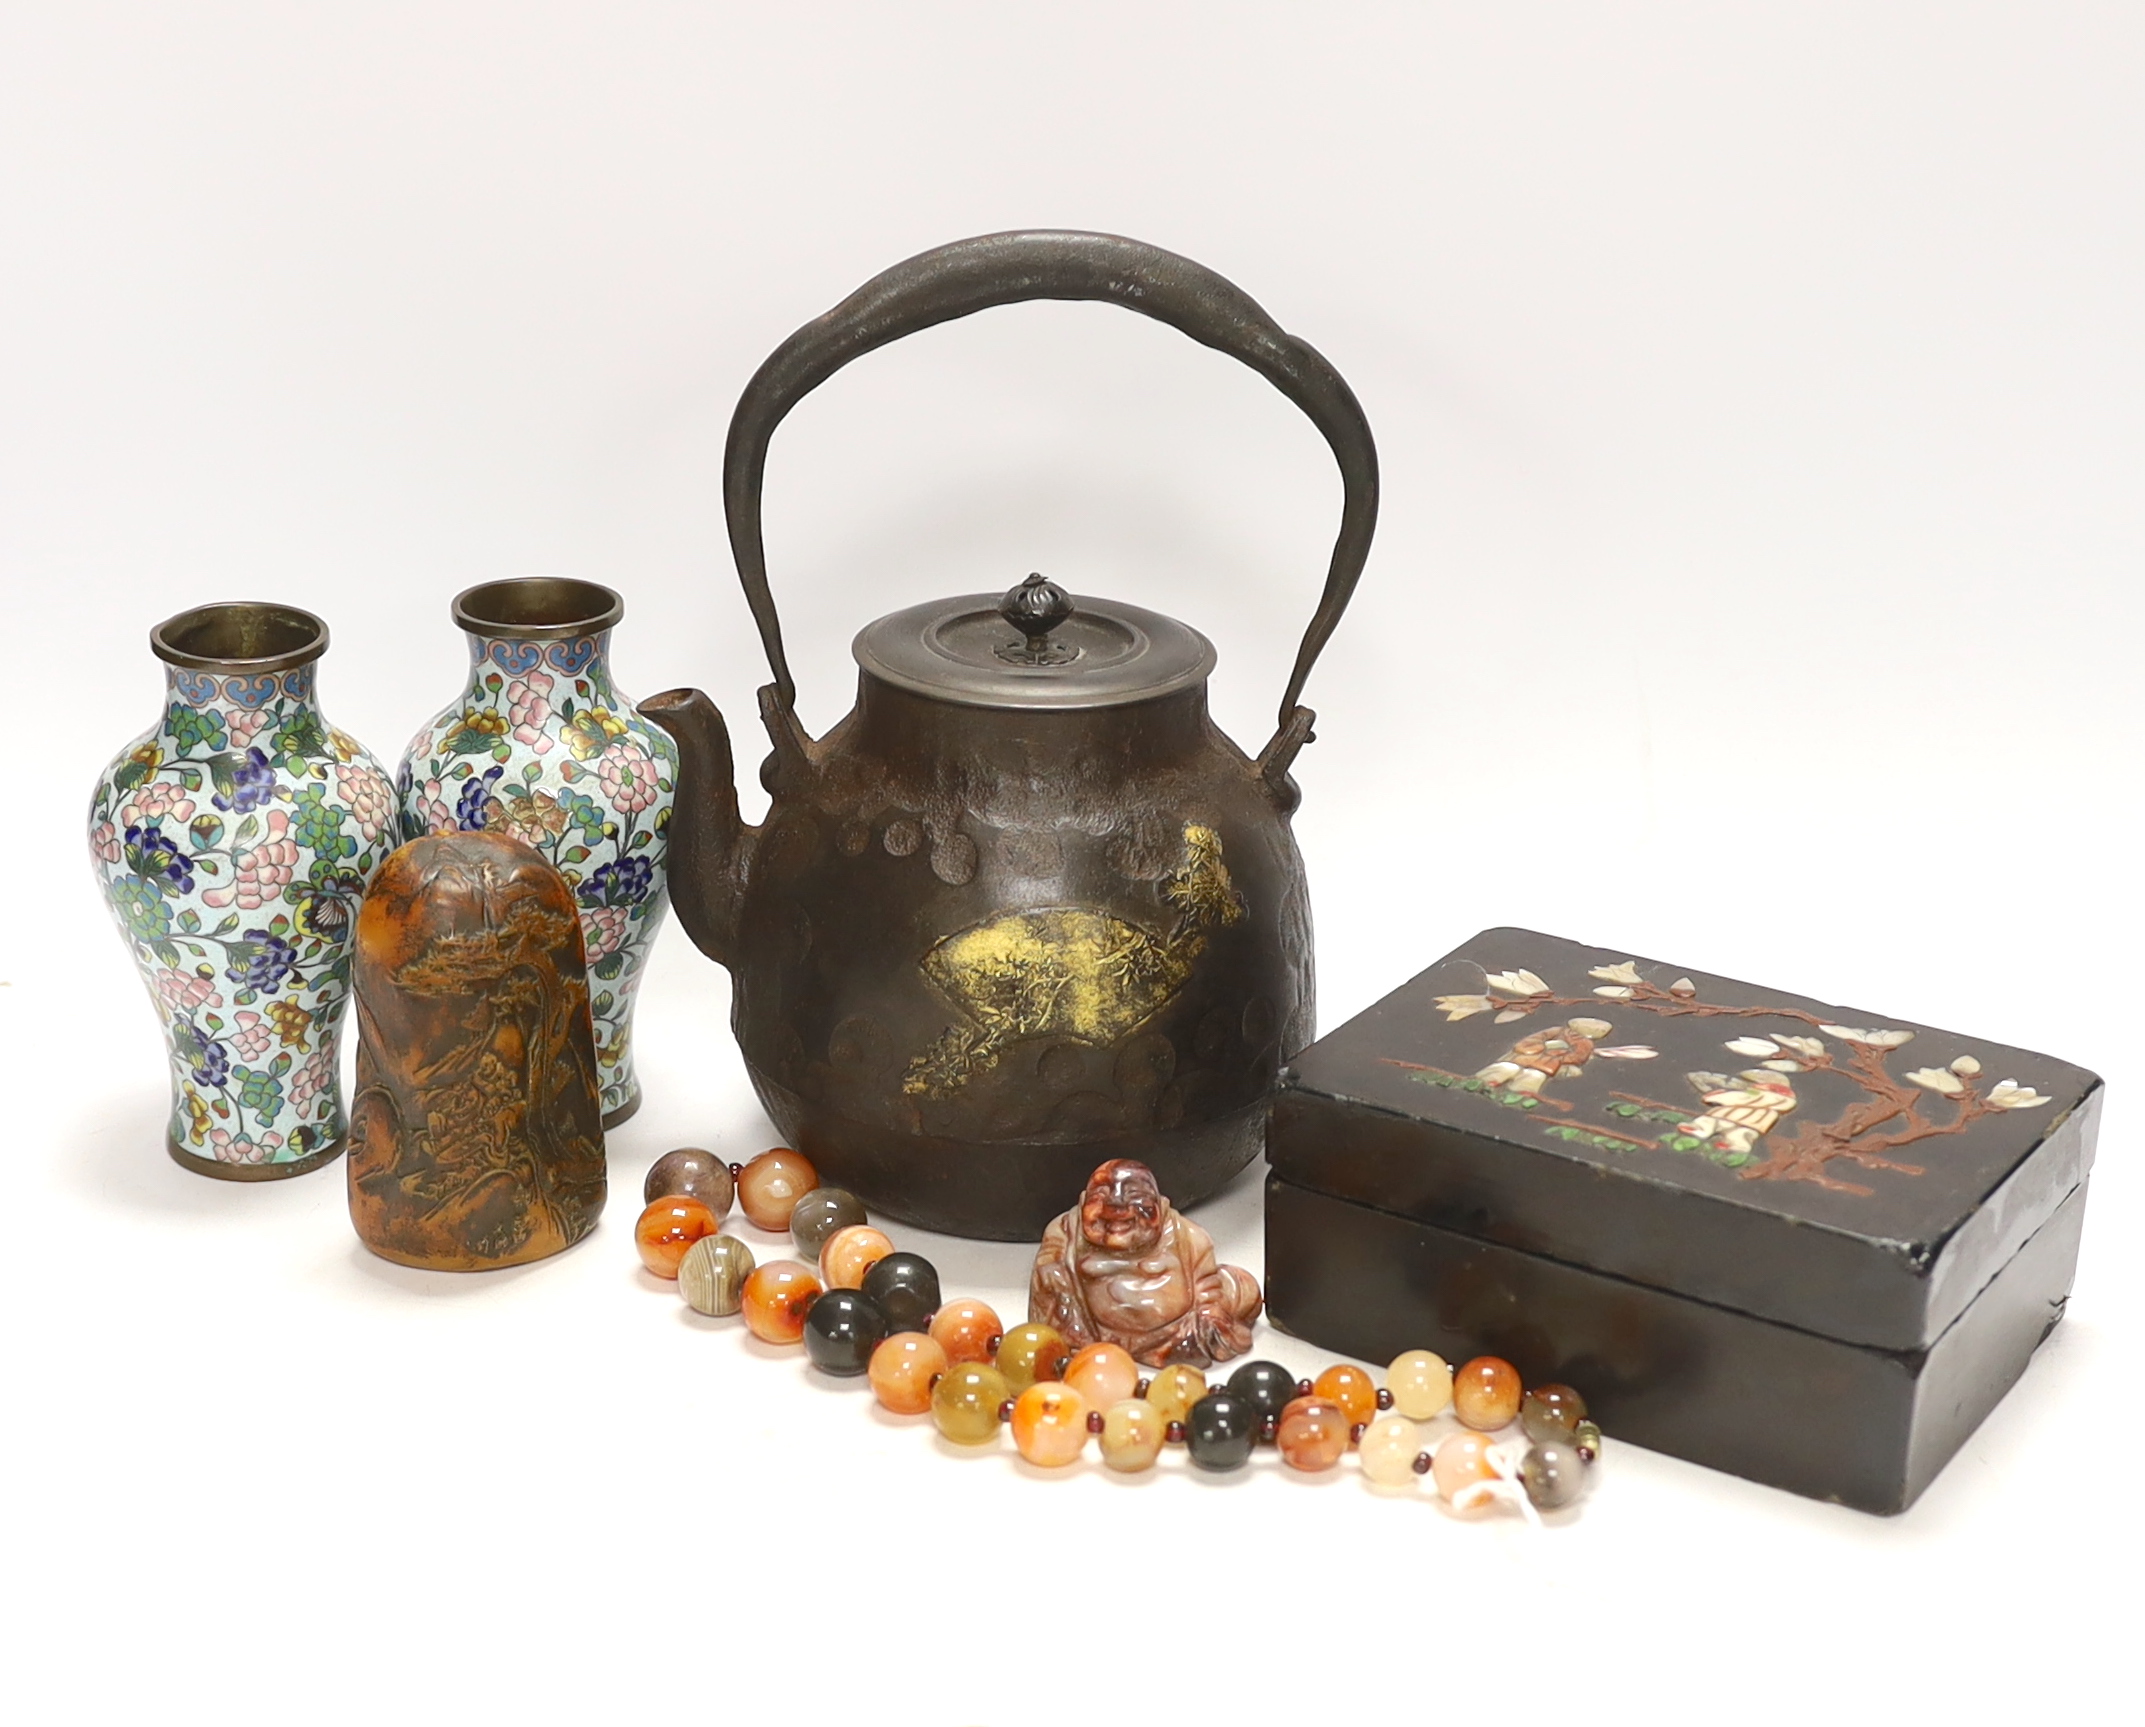 A Japanese iron tetsubin kettle with gilt decoration, a pair of Chinese cloisonné enamel vases, 12.5cm, a lacquered box with mother of pearl inlay, a carved black stone disc, 5cm diameter, a miniature ceramic pot and an